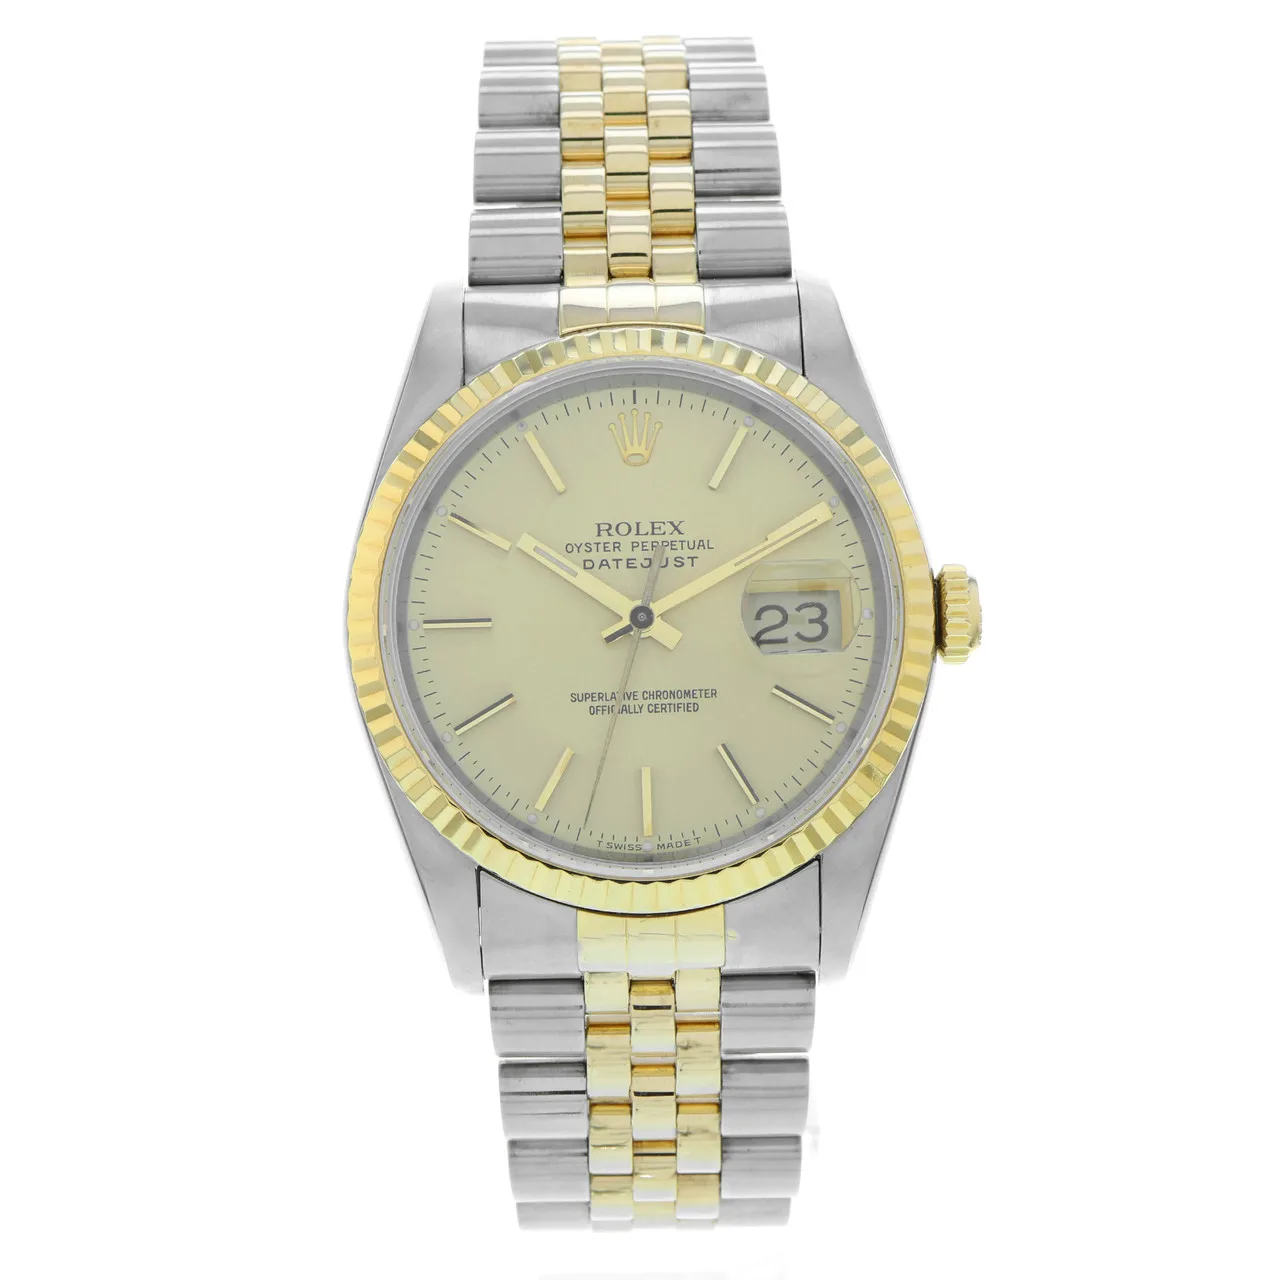 1990 Rolex Datejust 36 Two-Tone / Fluted / Champagne / Jubilee 16233 Listing Image 1